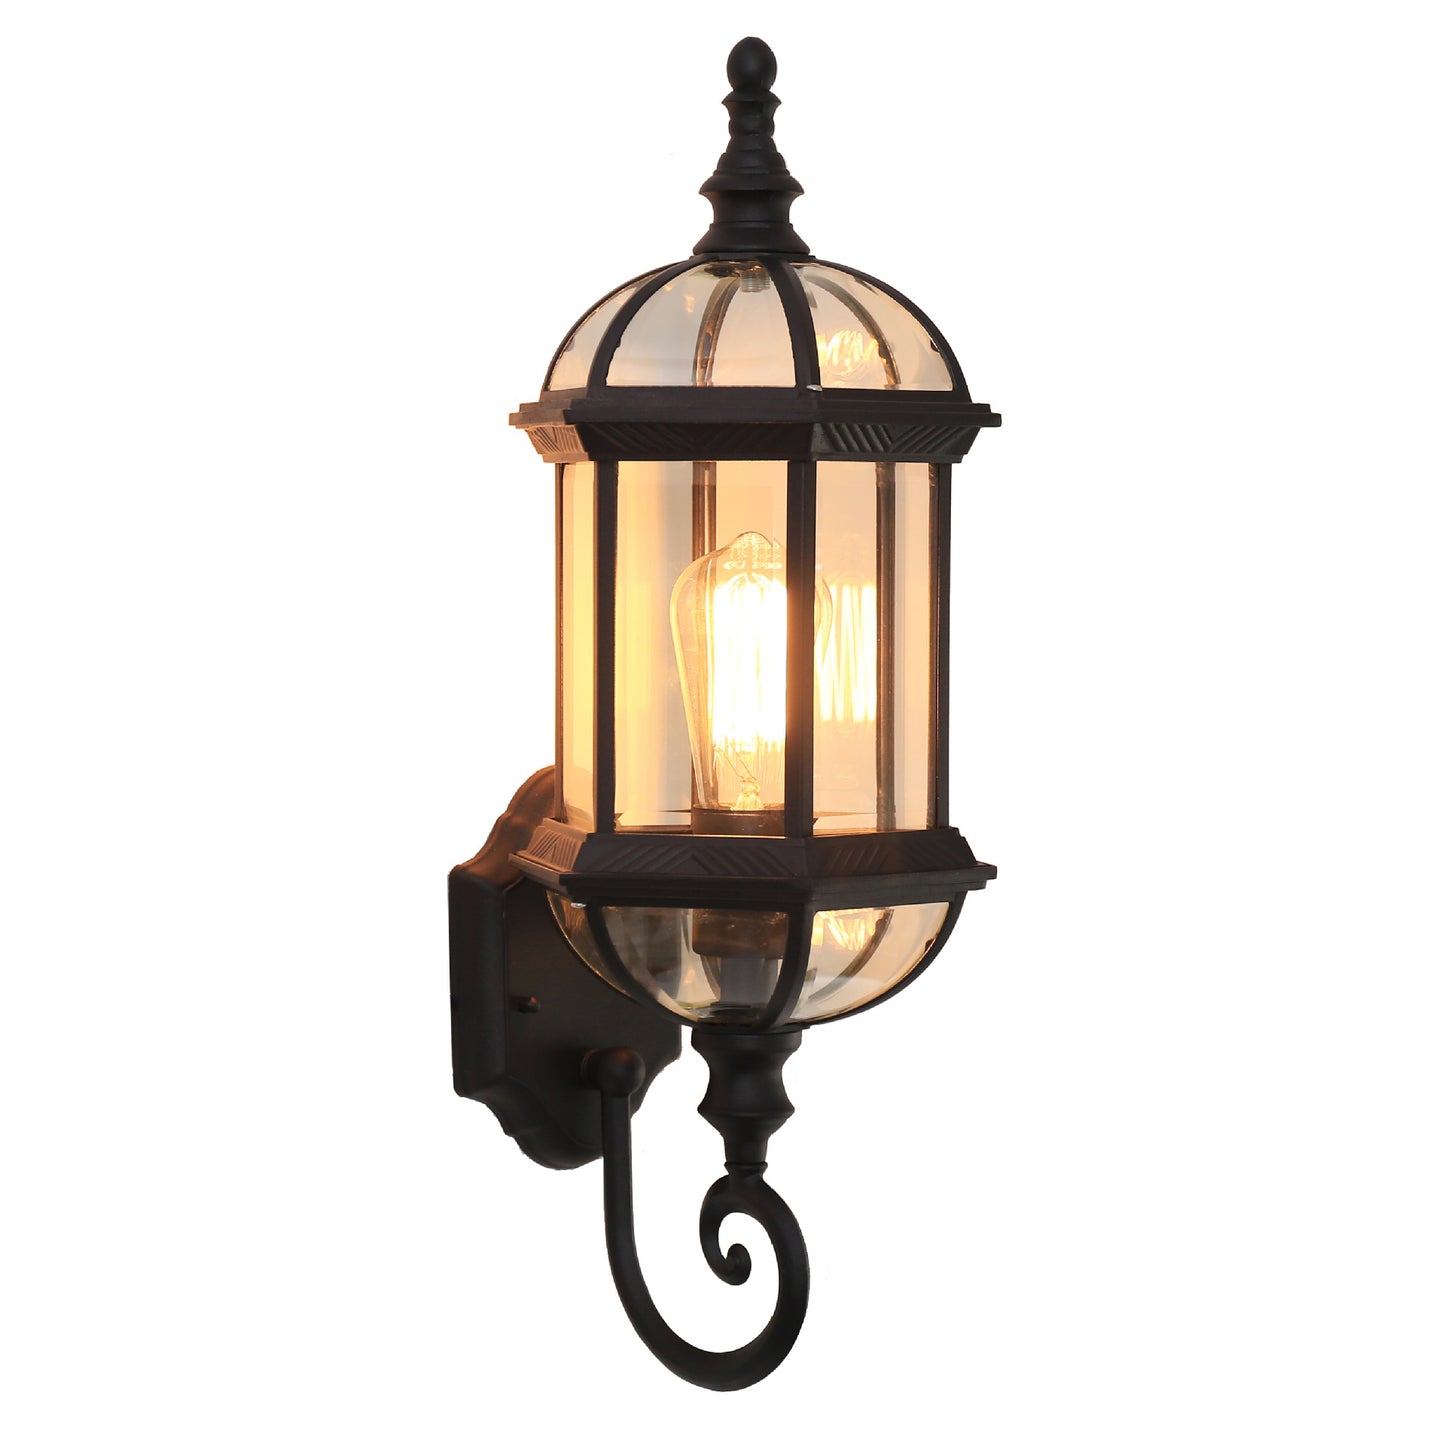 Courtyard Outdoor Waterproof Wall Lamp Store Decoration Lamp